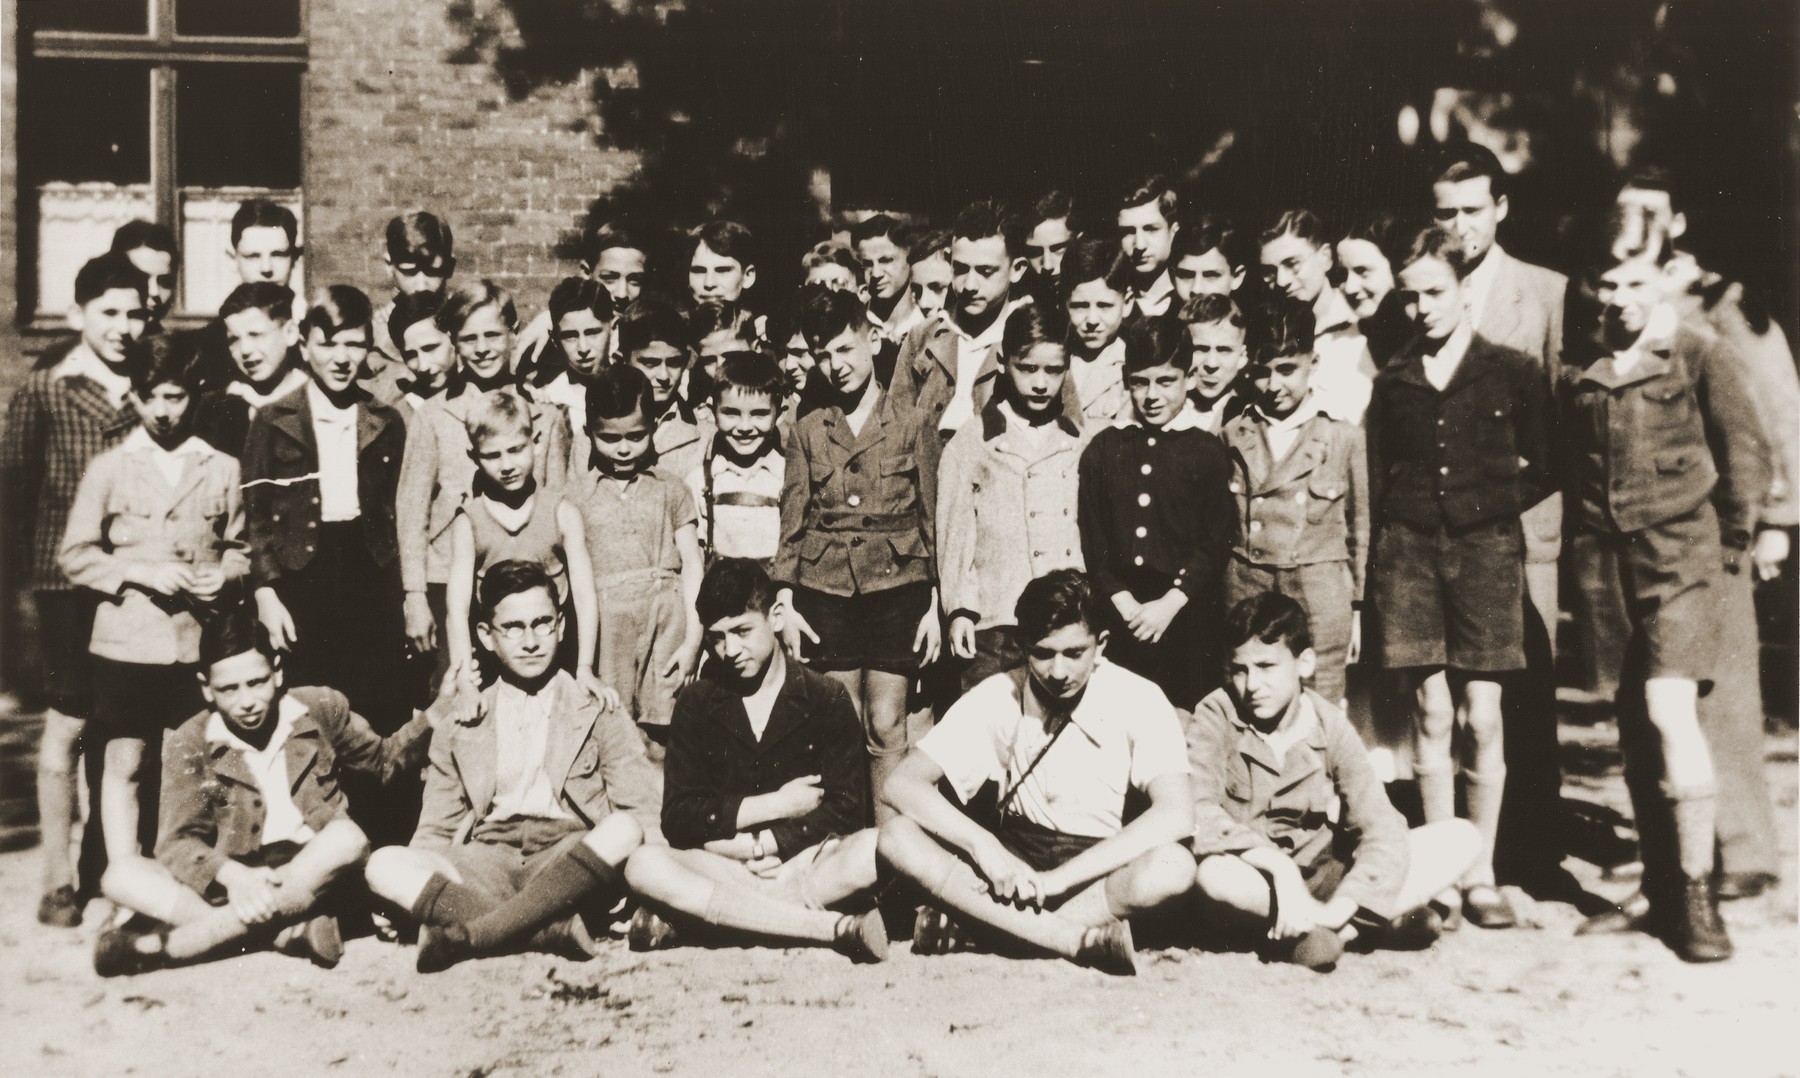 The children living at the Baruch Auerbach Jewish orphanage in Berlin.

Ralph Moratz is standing directly behind the second boy in first row from left and Wolfgang Grajonjz is standing directly next to Ralph on the right (his head is turned downward).